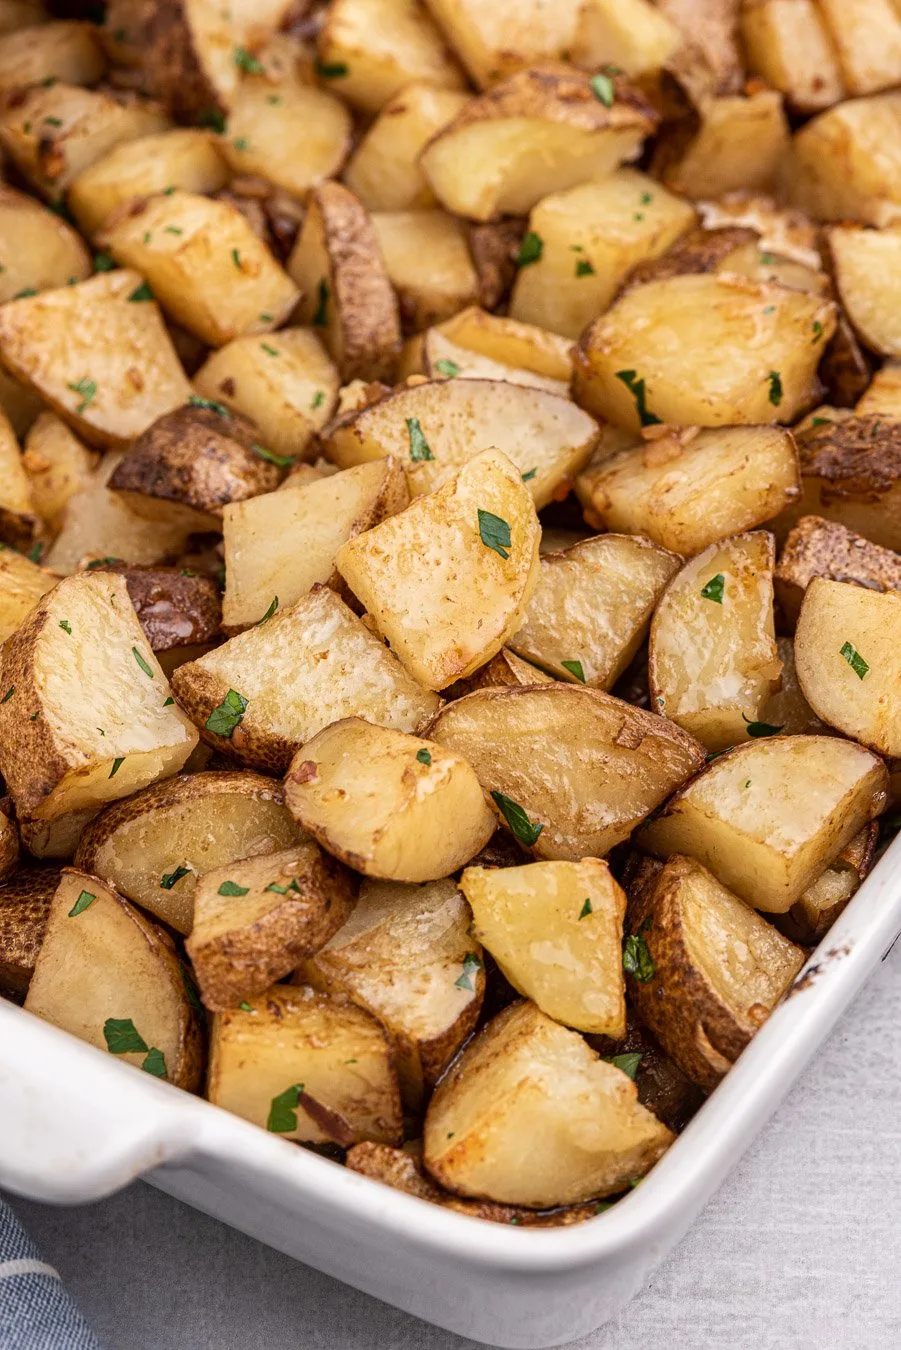 angled down view of baking dish full of roasted potatoes